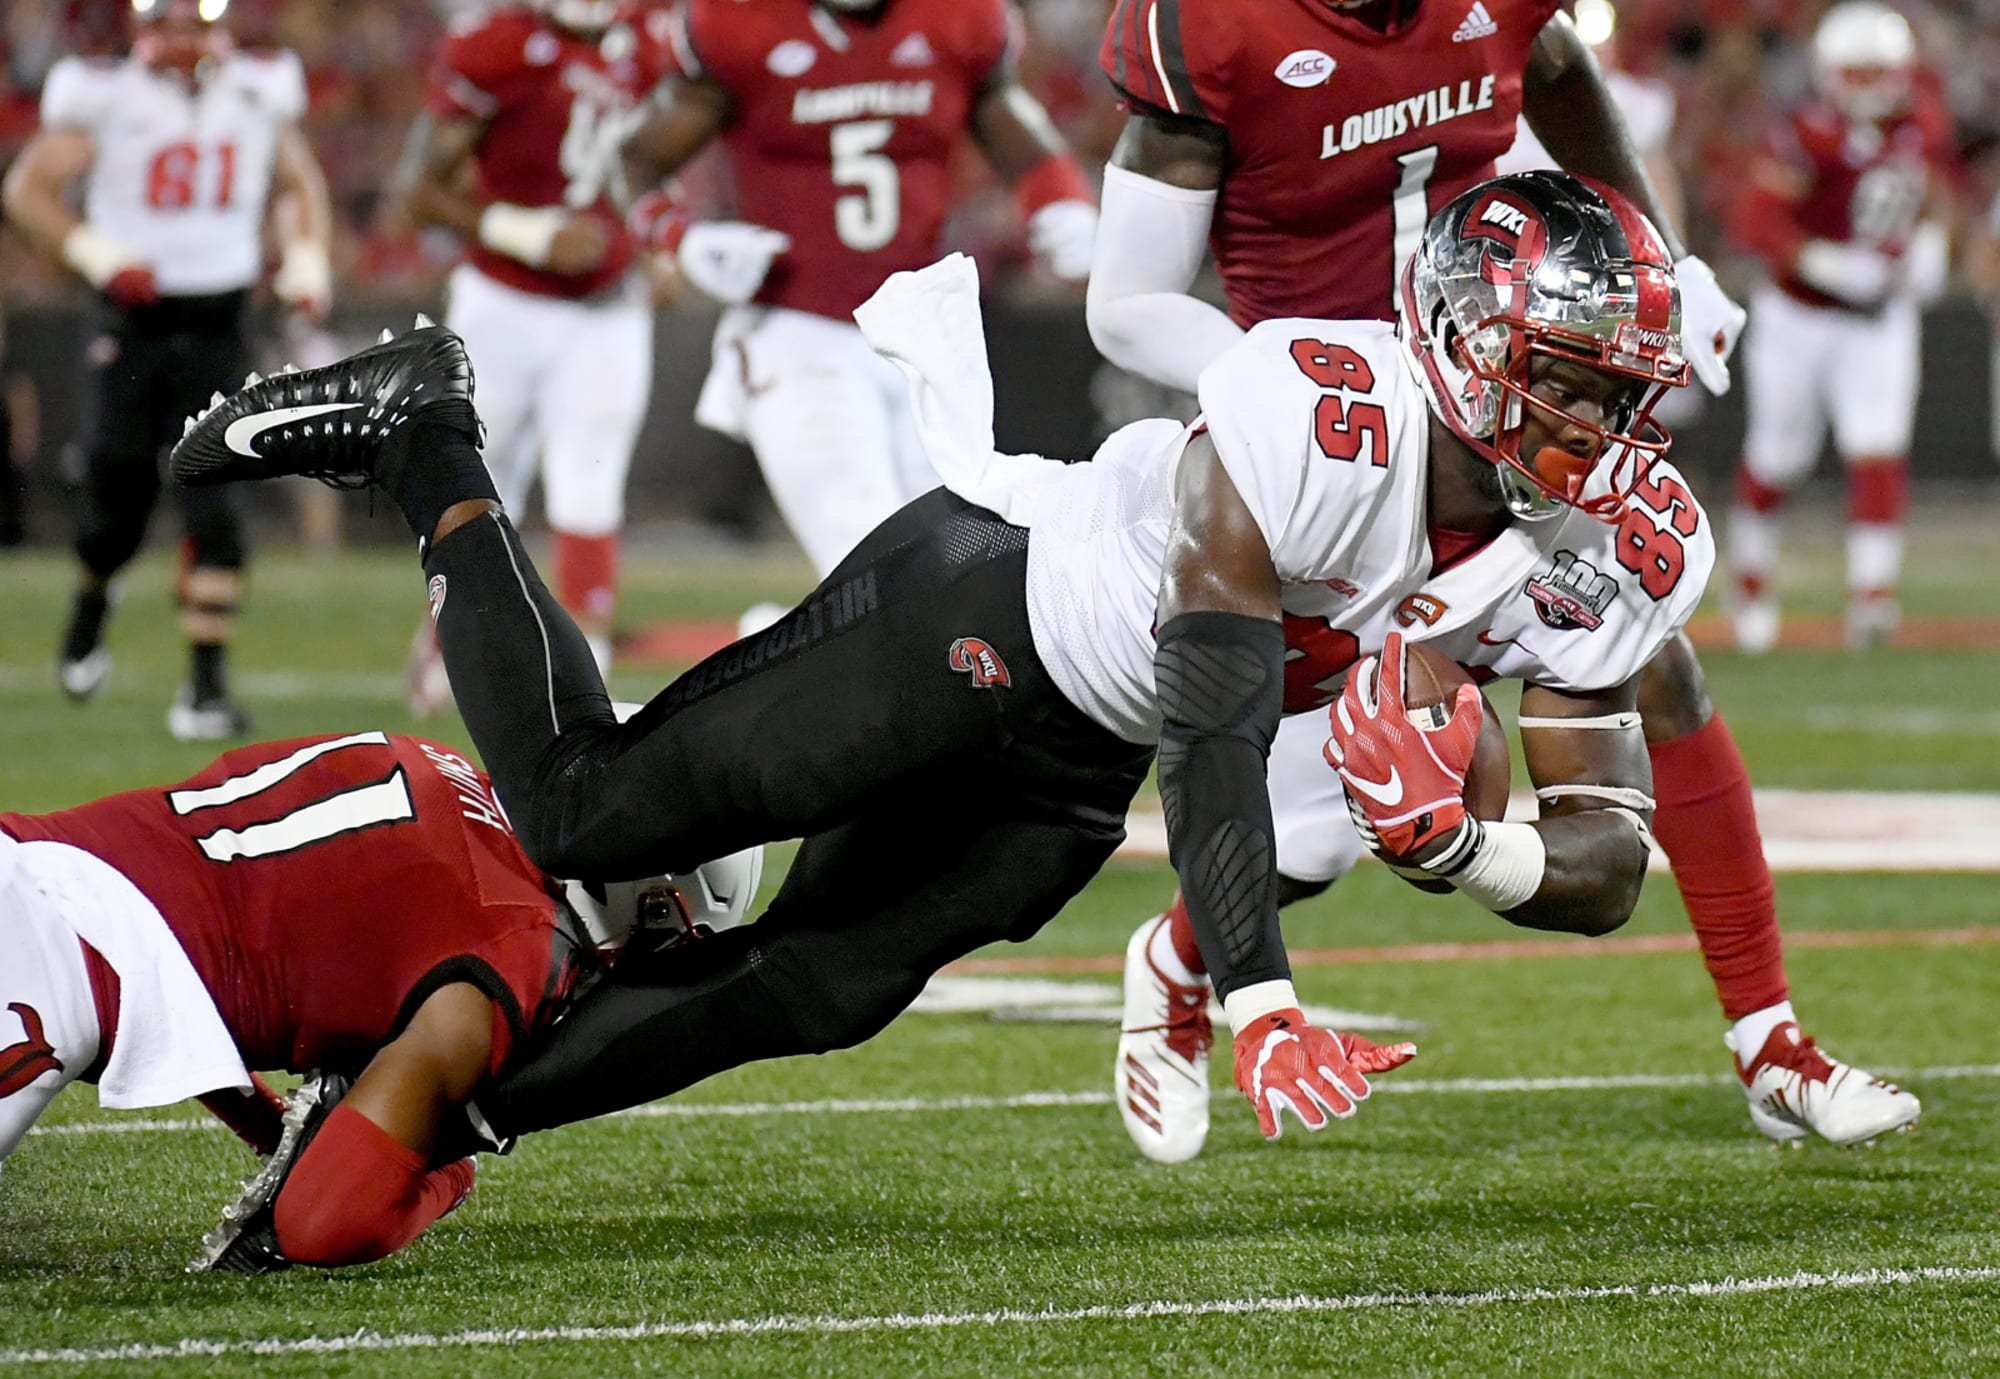 Louisville football: What you need to know before the game vs. WKU